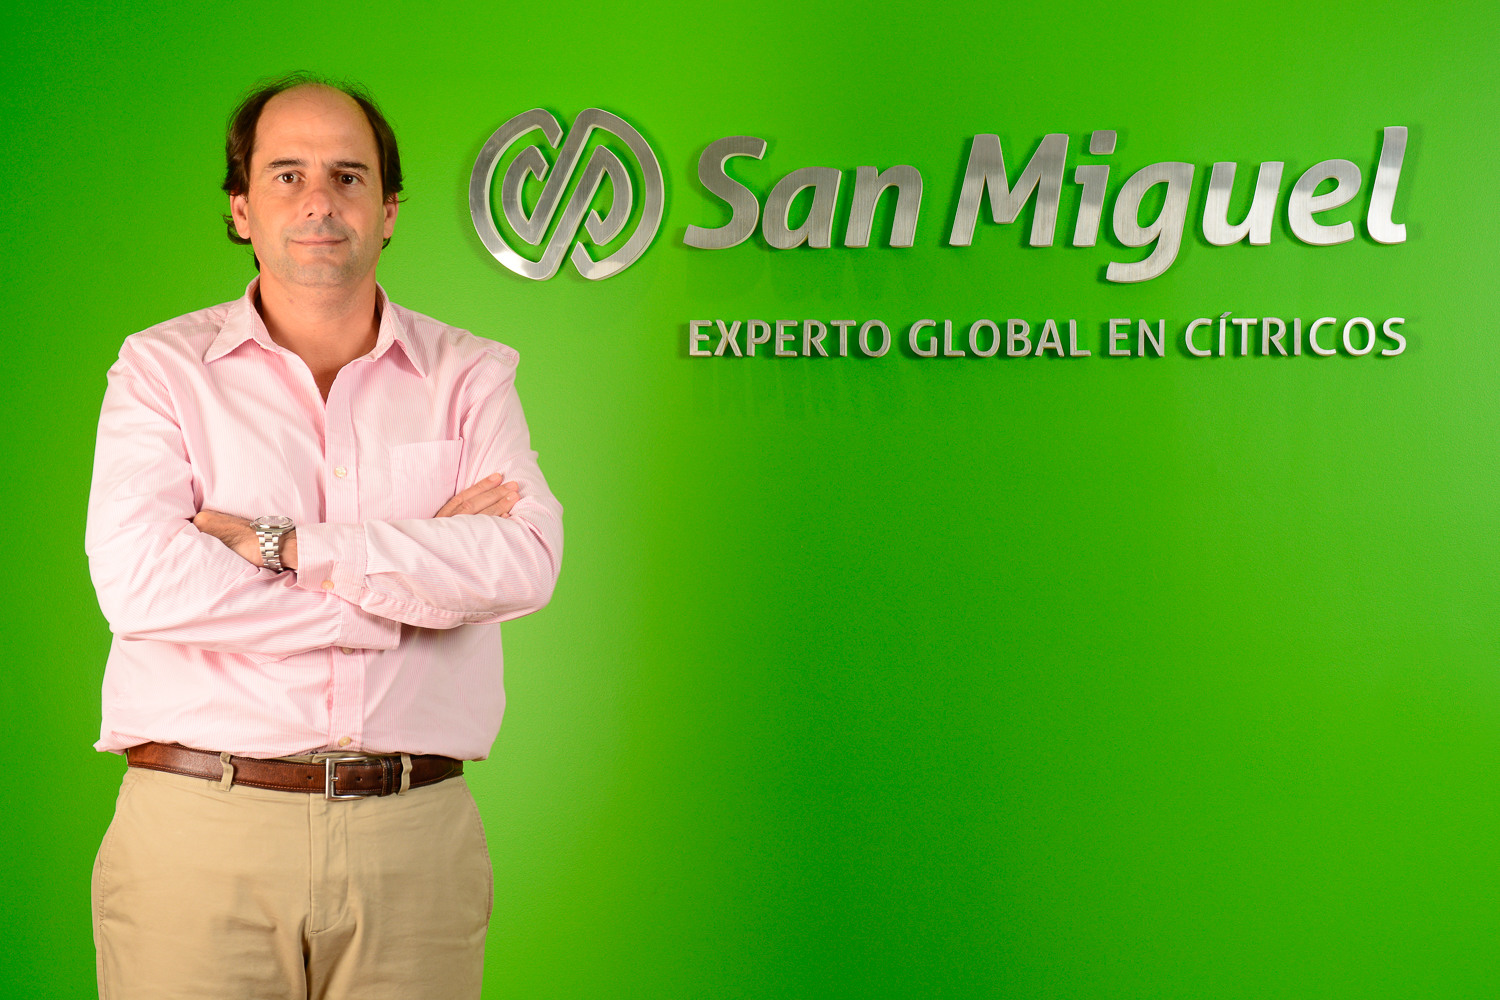 San Miguel S.A. is a global agribusiness company from Argentina. It is the leading producer of fresh citrus for export in the Southern Hemisphere, and in turn the world leader in processing value-added citrus products, specifically handling 15% of worldwide ground lemon supplies.